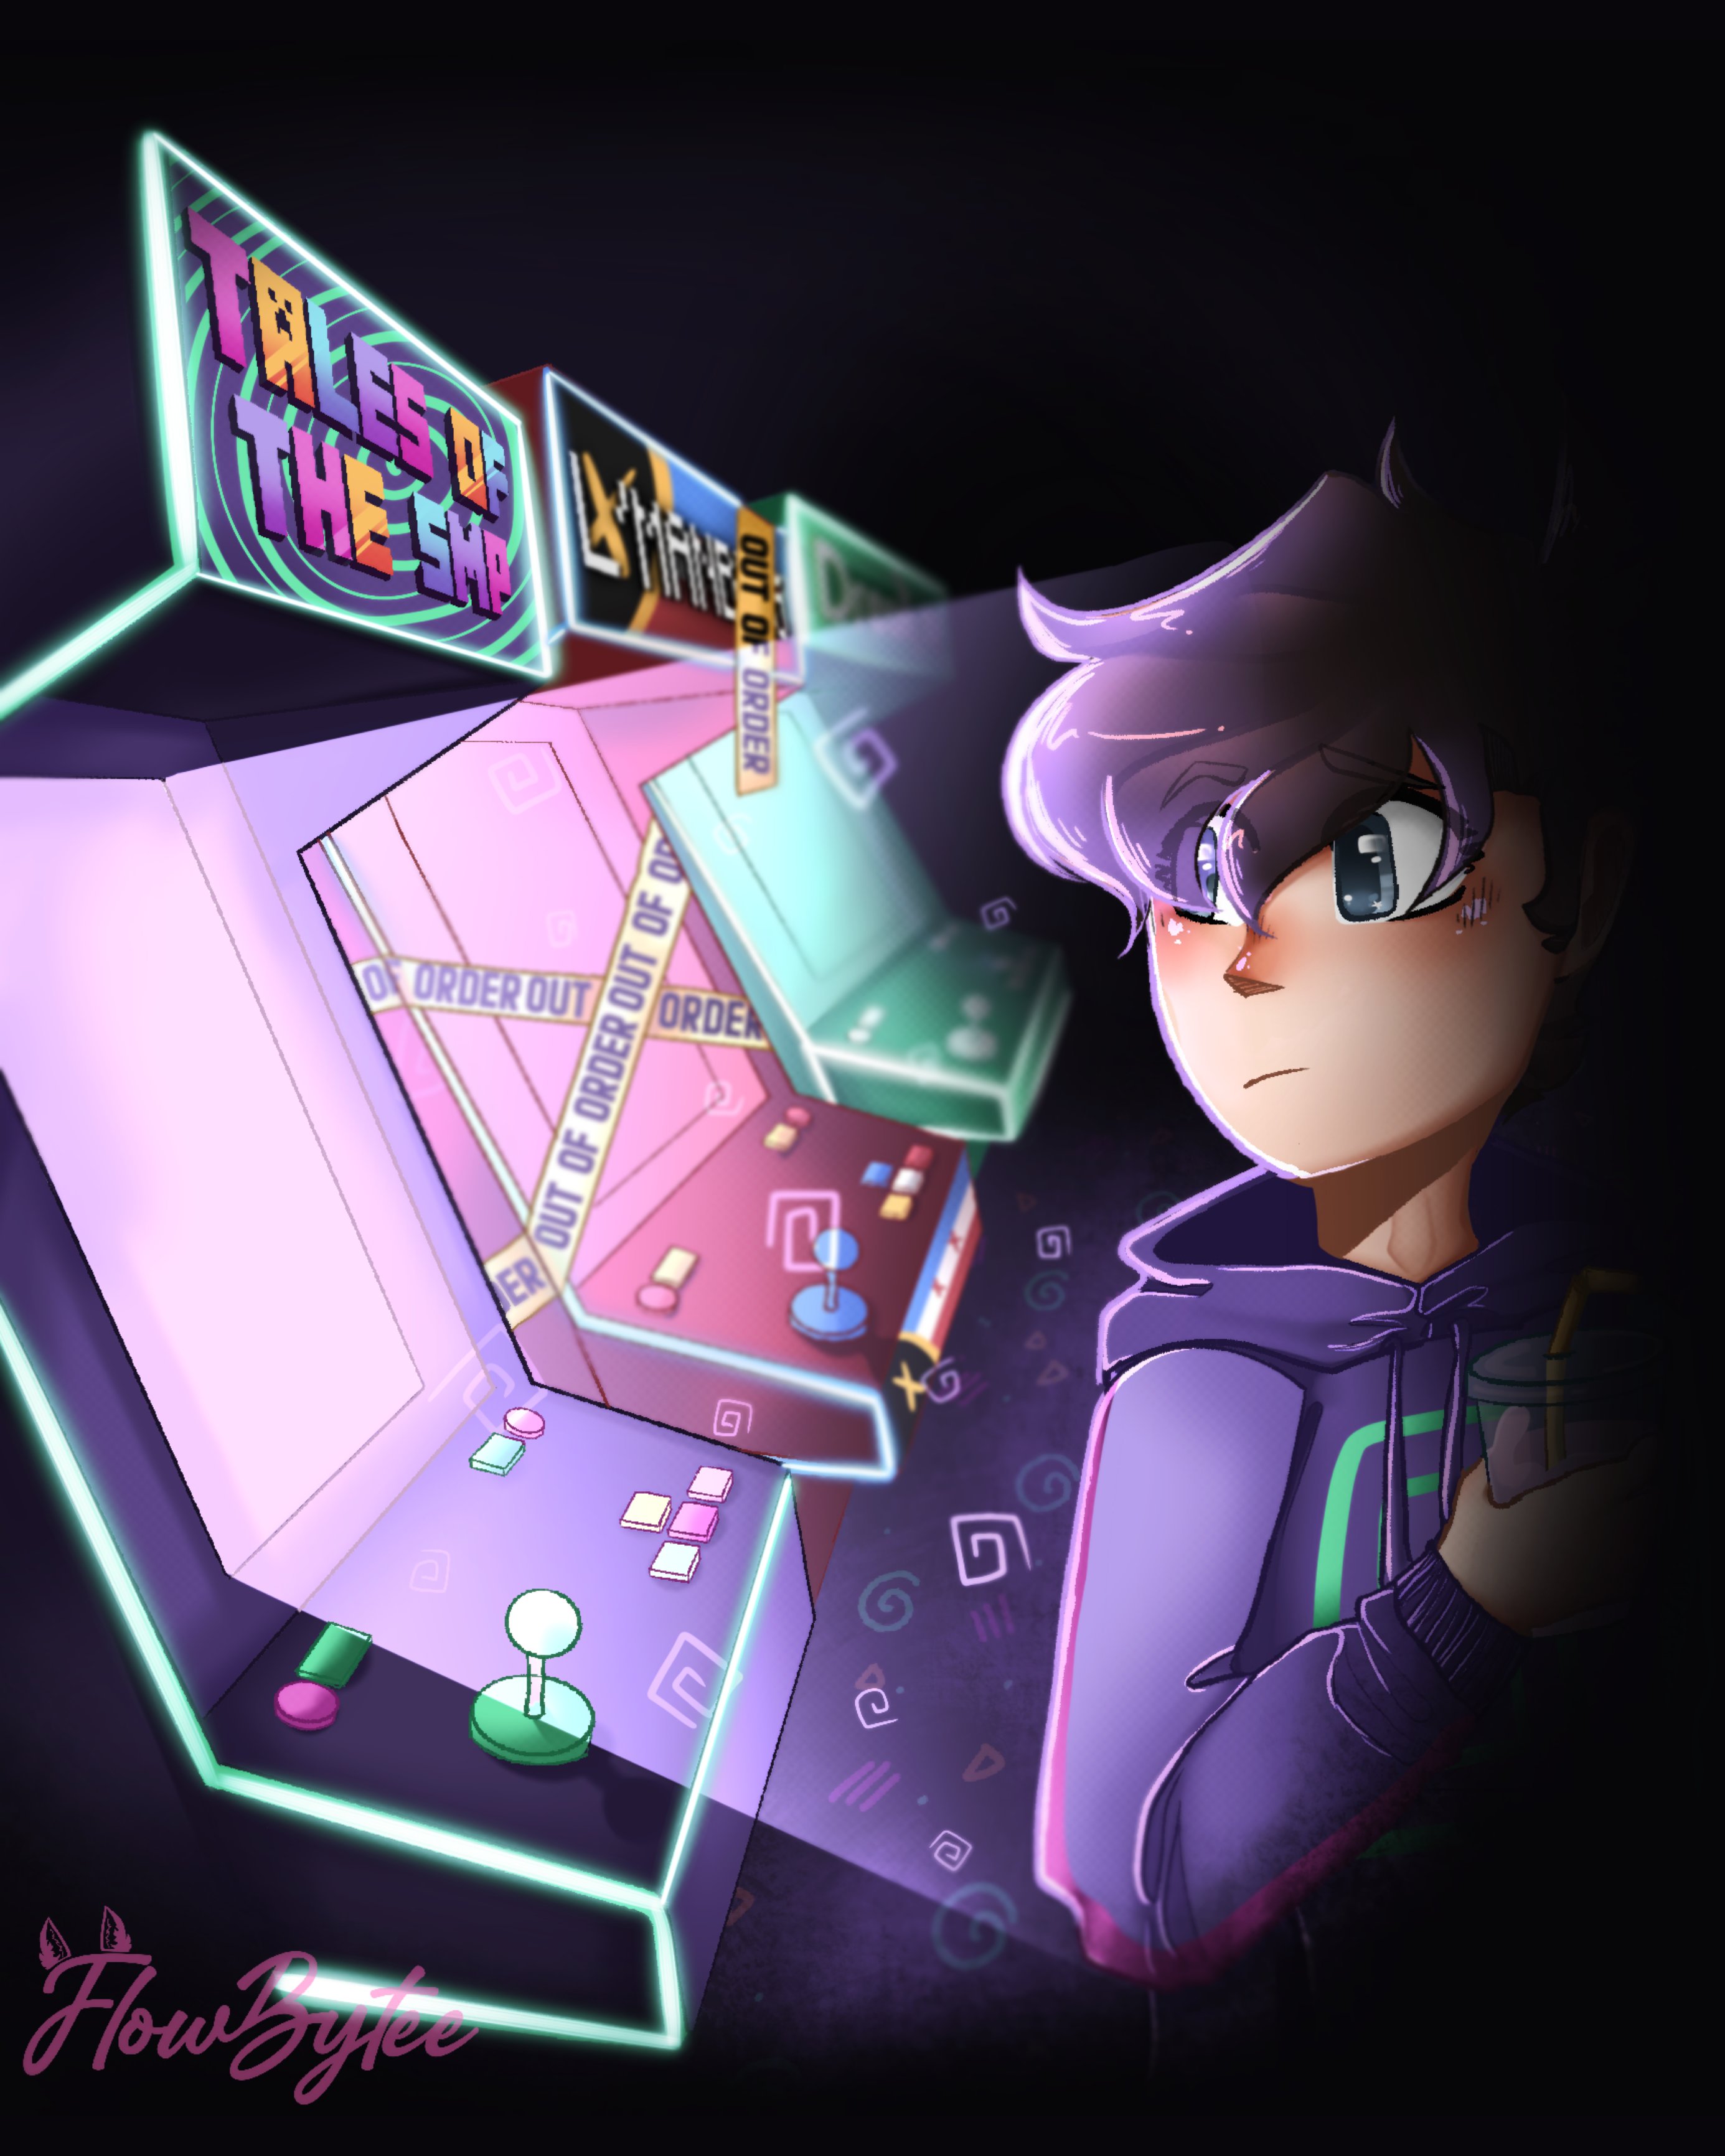 This is a drawing of Karl from the waist-up. He's wearing his purple hoodie with the green swirl. He's standing in a dark room looking at a series of arcade machines. The one closest to the screen with the title Tales of the SMP is shining a brighter light than the others, drawing Karl's attention. The next one back is L'manberg but there is out of order caution tape covering its screen. The third arcade machine is hard to make out, but it says Dream SMP.